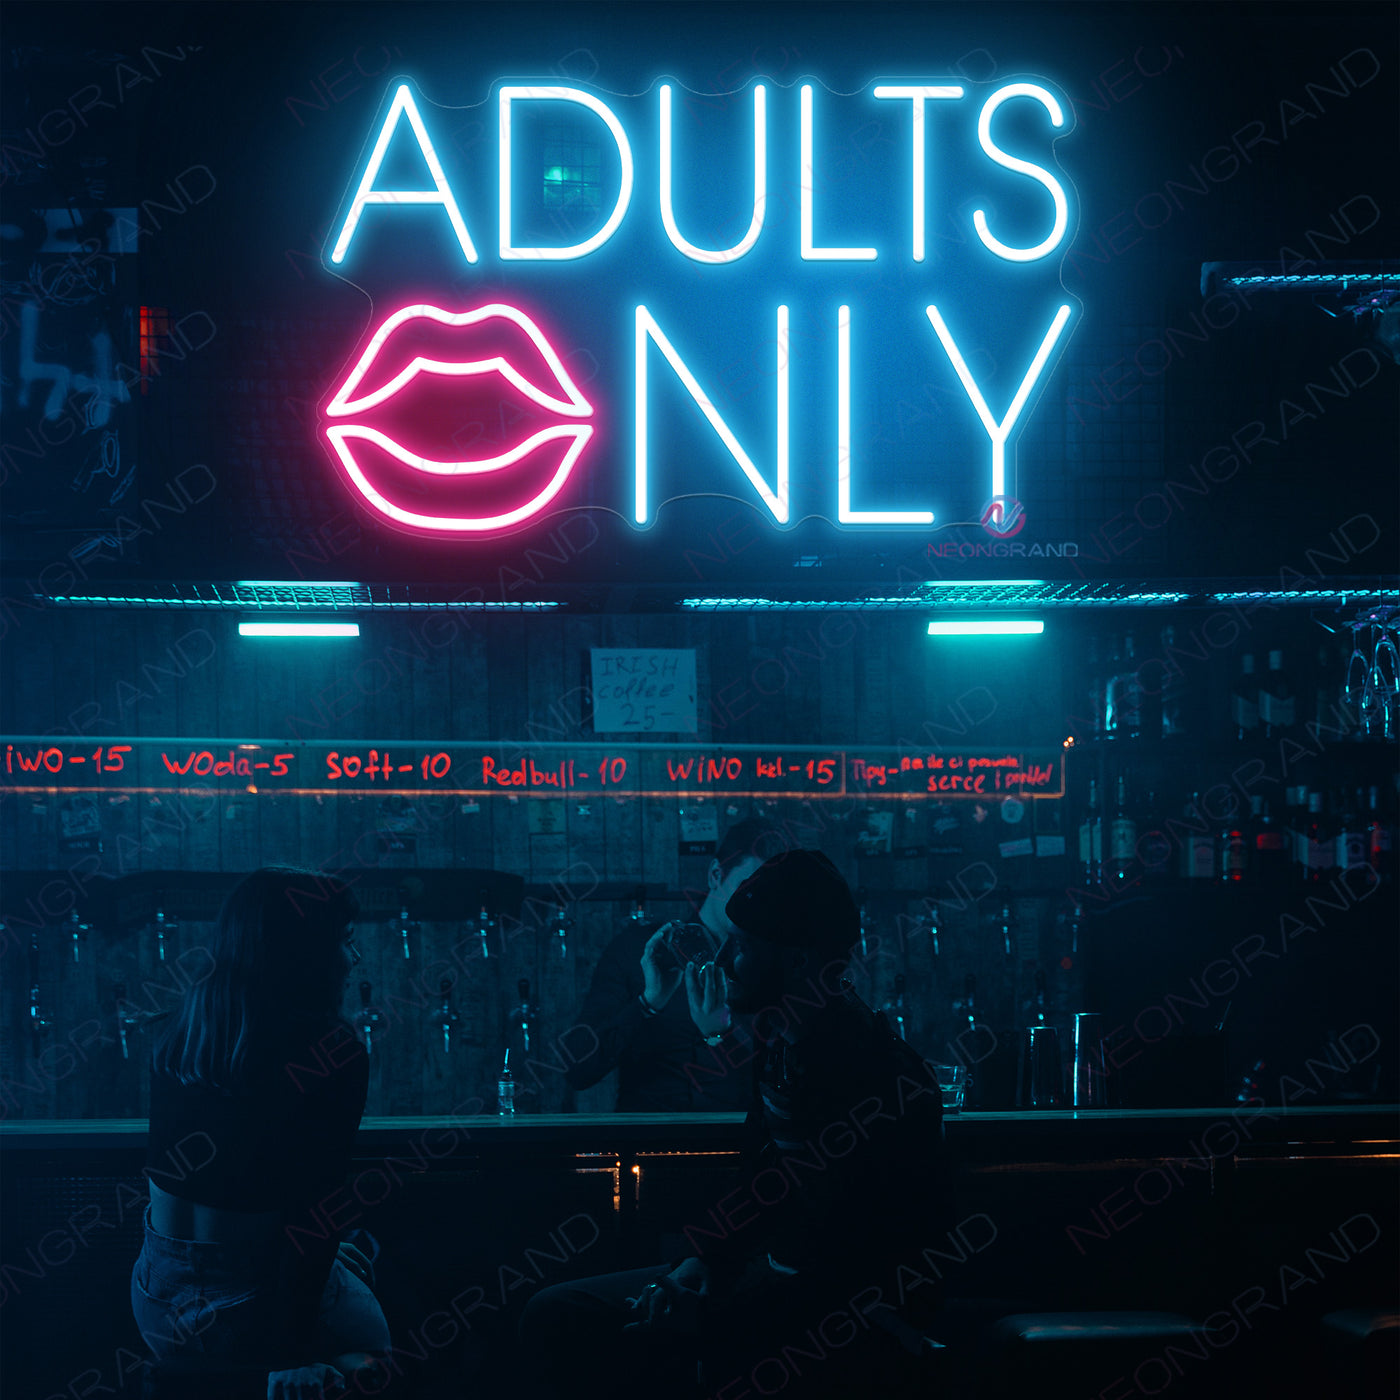 Adults Only Neon Sign Bar Led Light sky blue